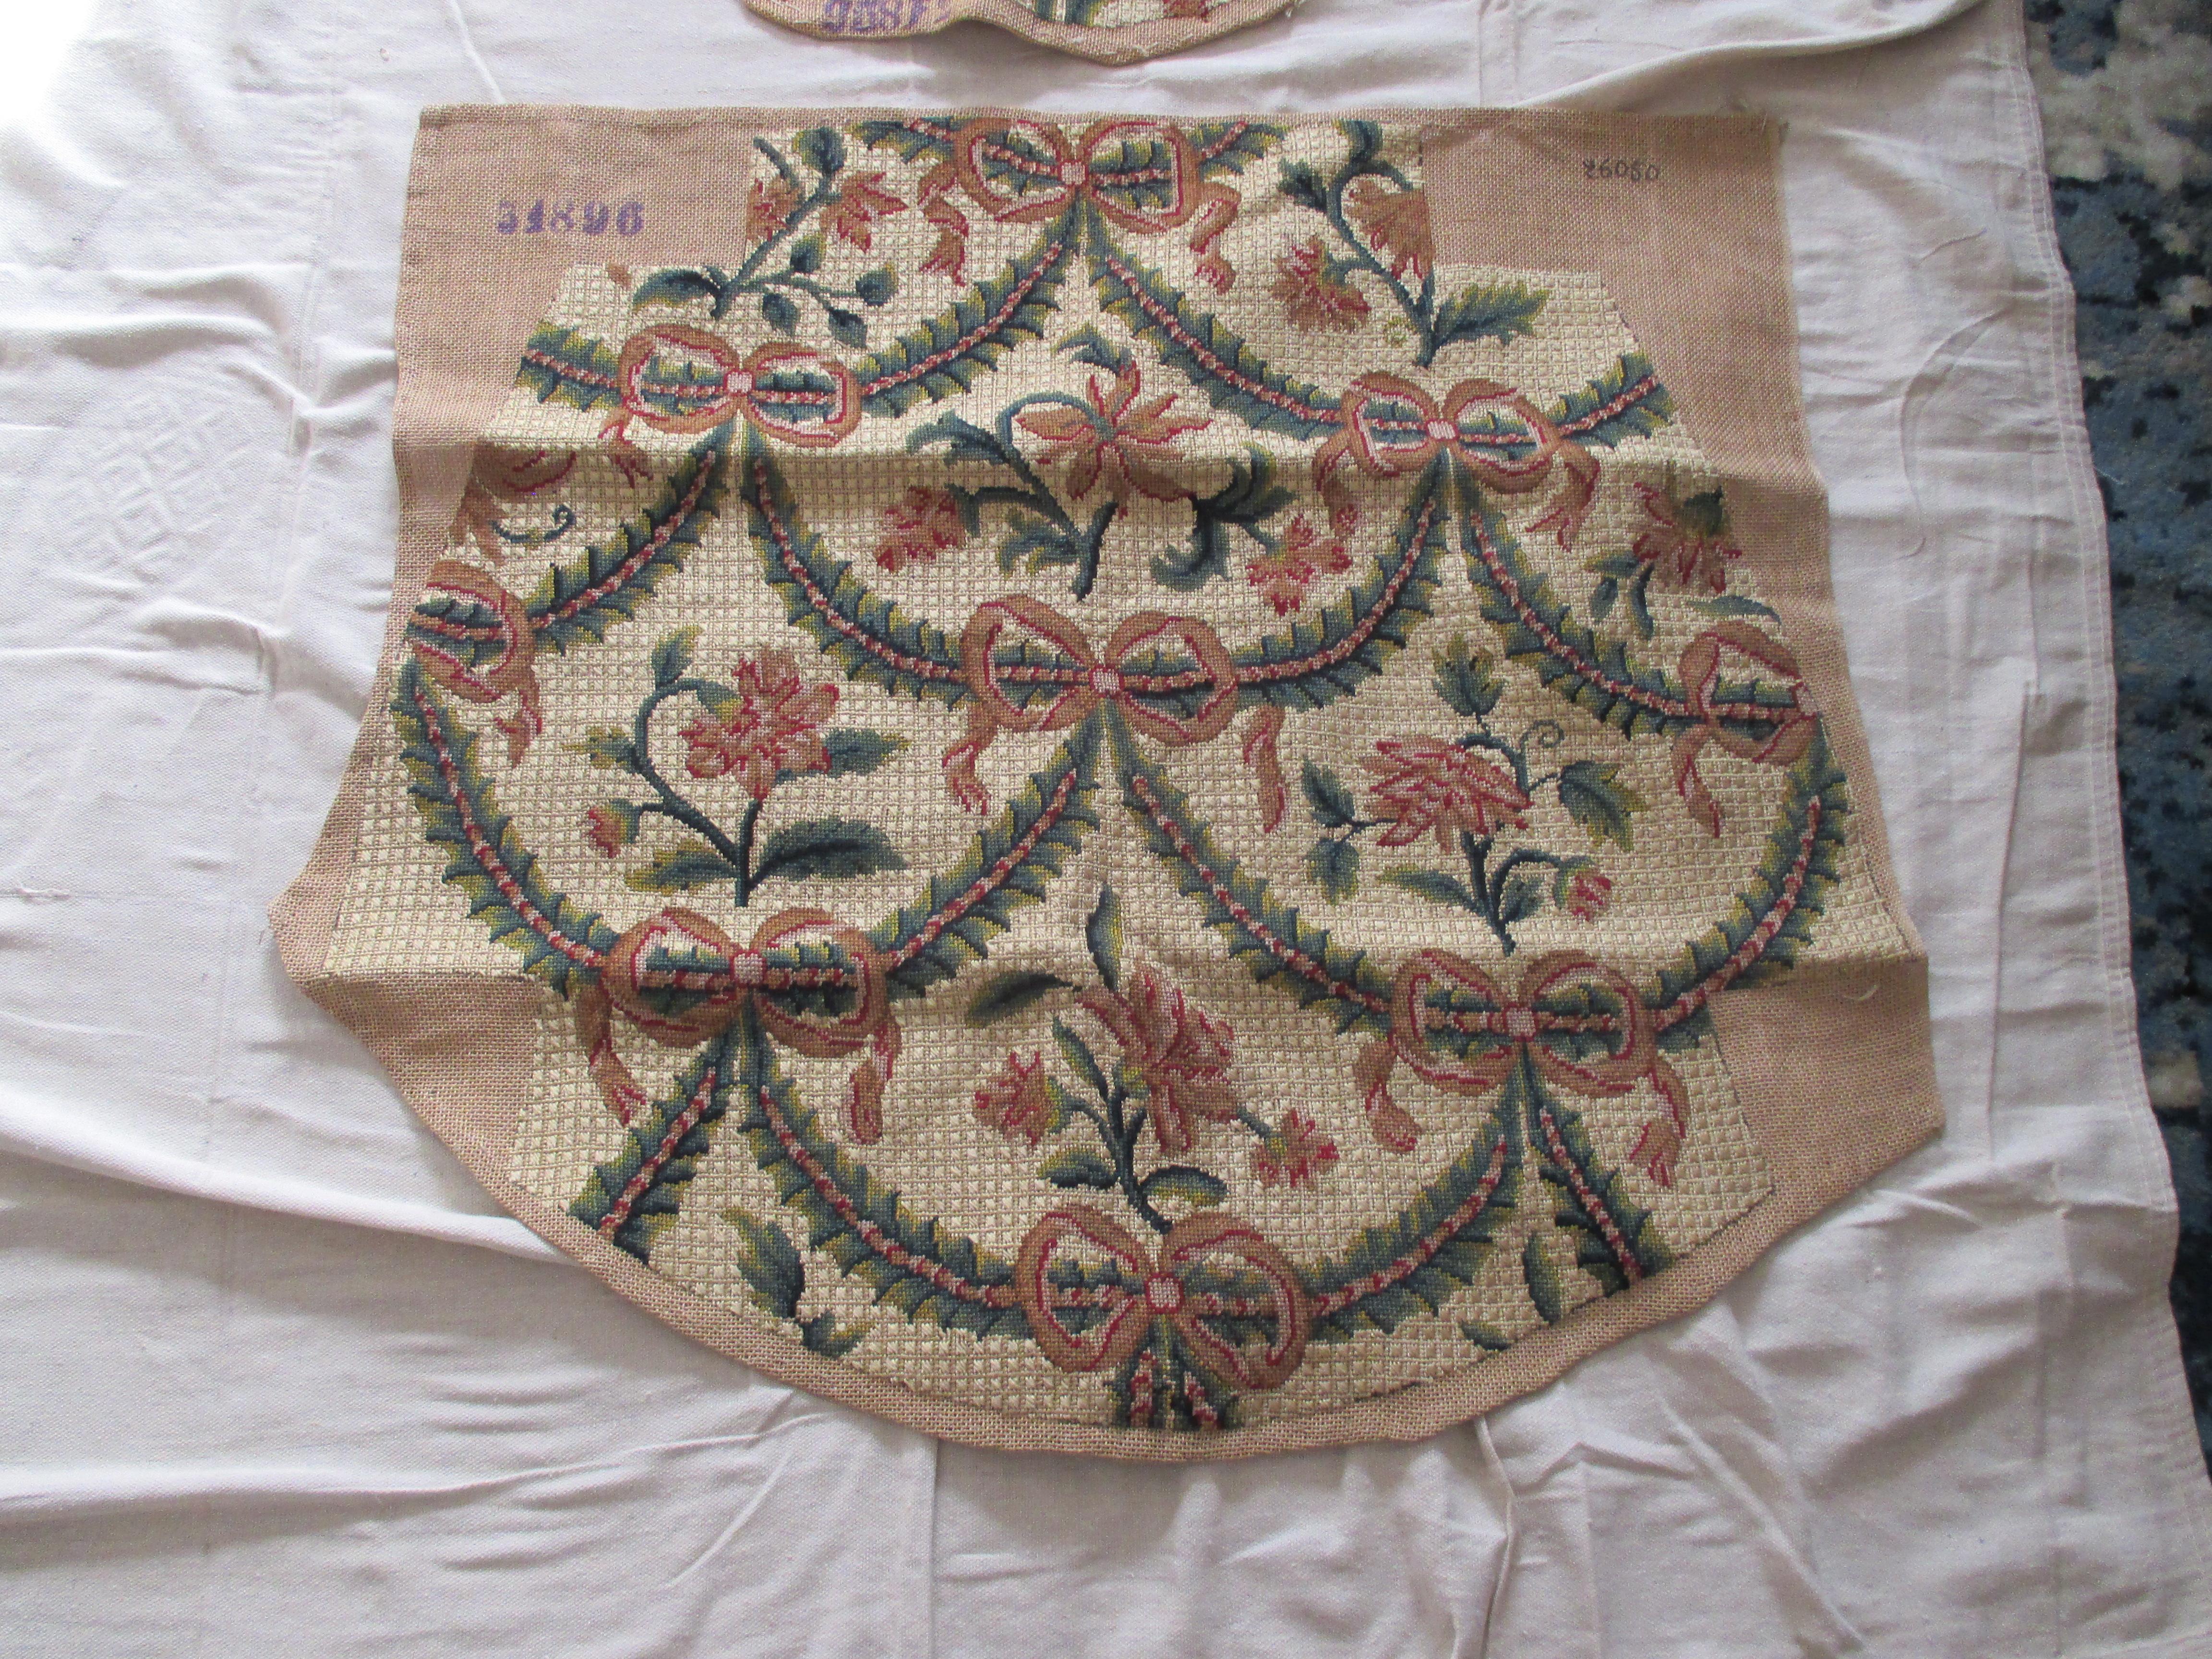 Antique chair tapestry set
Textile numbered: 54896
Ideal for upholstery.
In shades of green, red and tan
Floral and ribbons motif
Size: Small (back seat) is 20